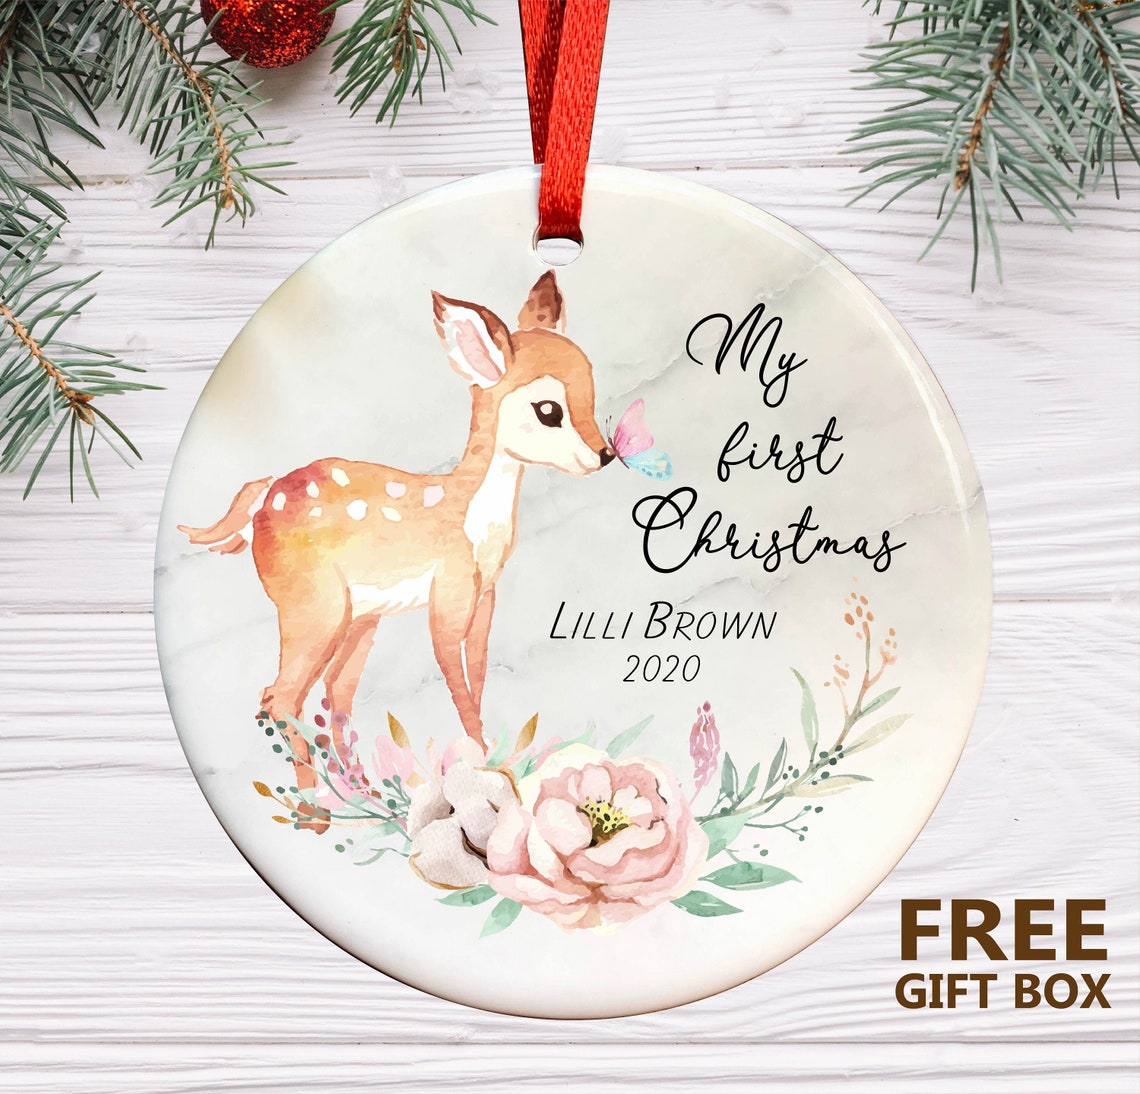 Personalized Baby's First Christmas Ornament - My first Christmas - Girl First Christmas